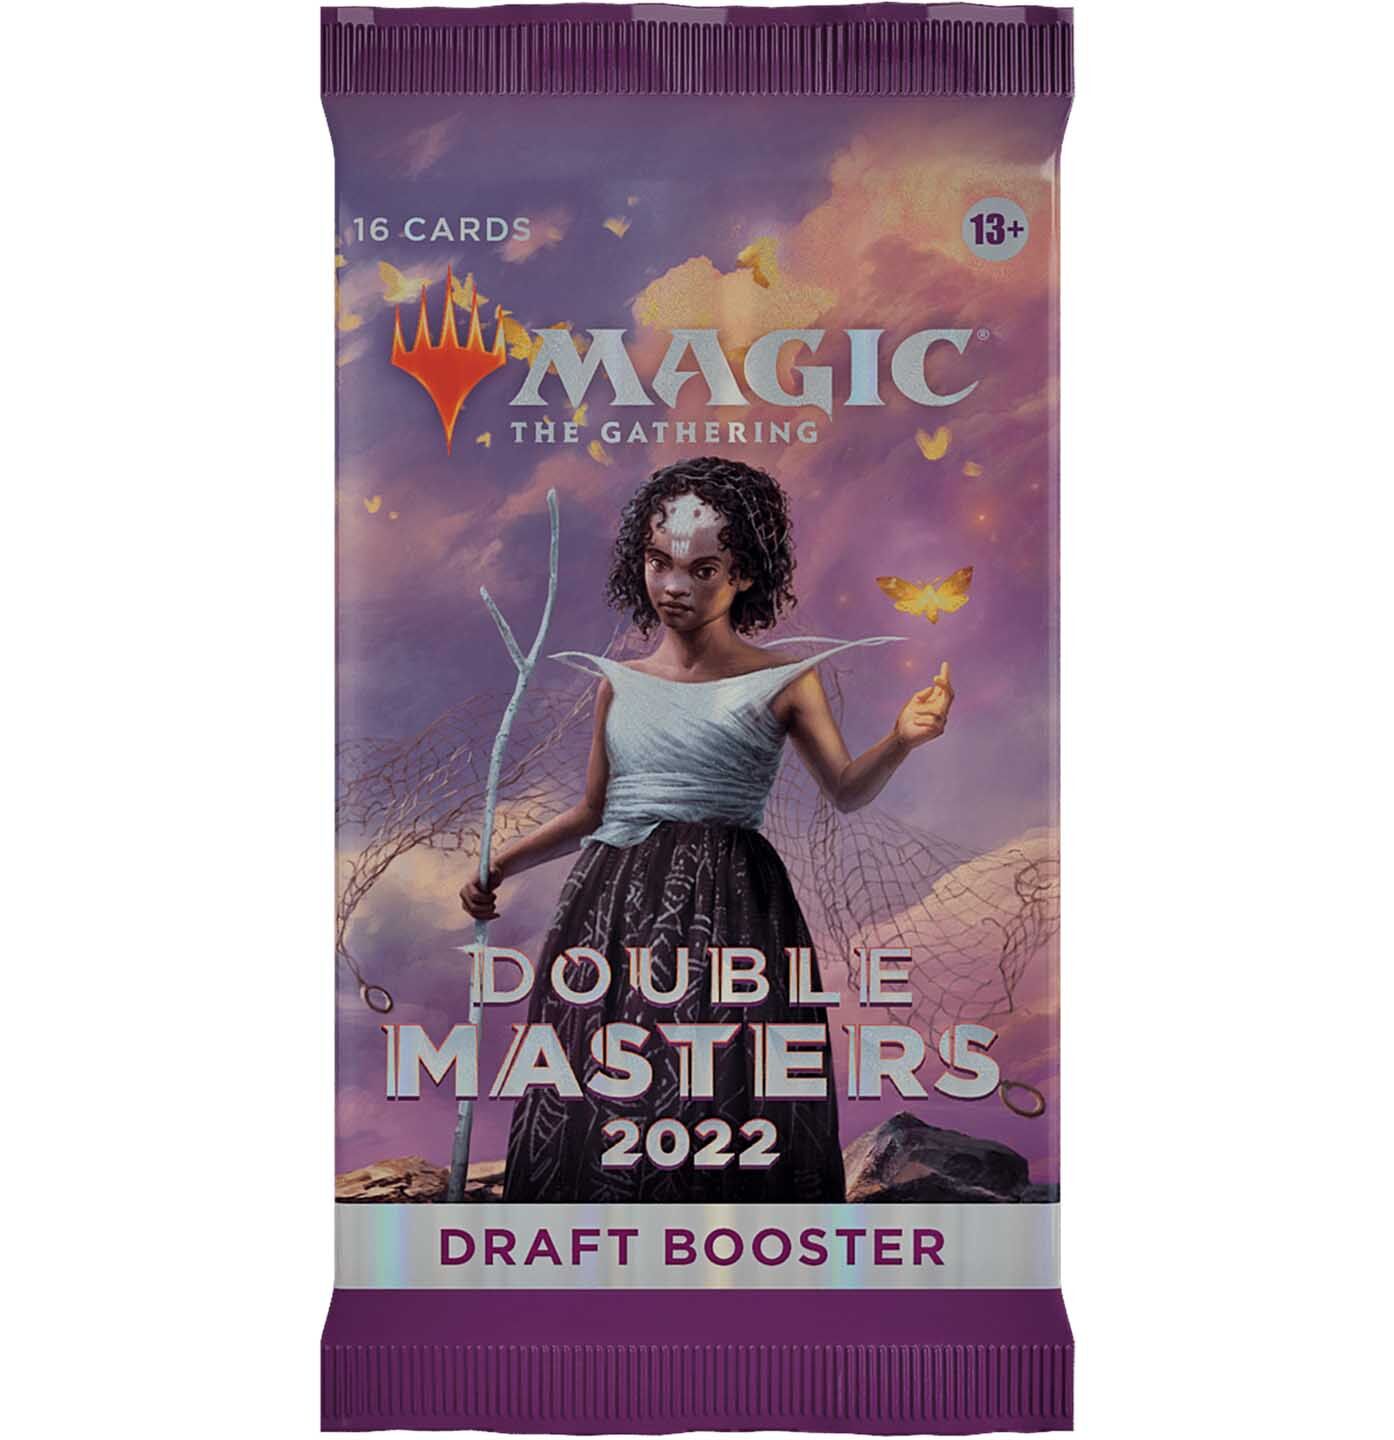 Double Masters 2022 Draft Booster - Magic the Gathering - EN